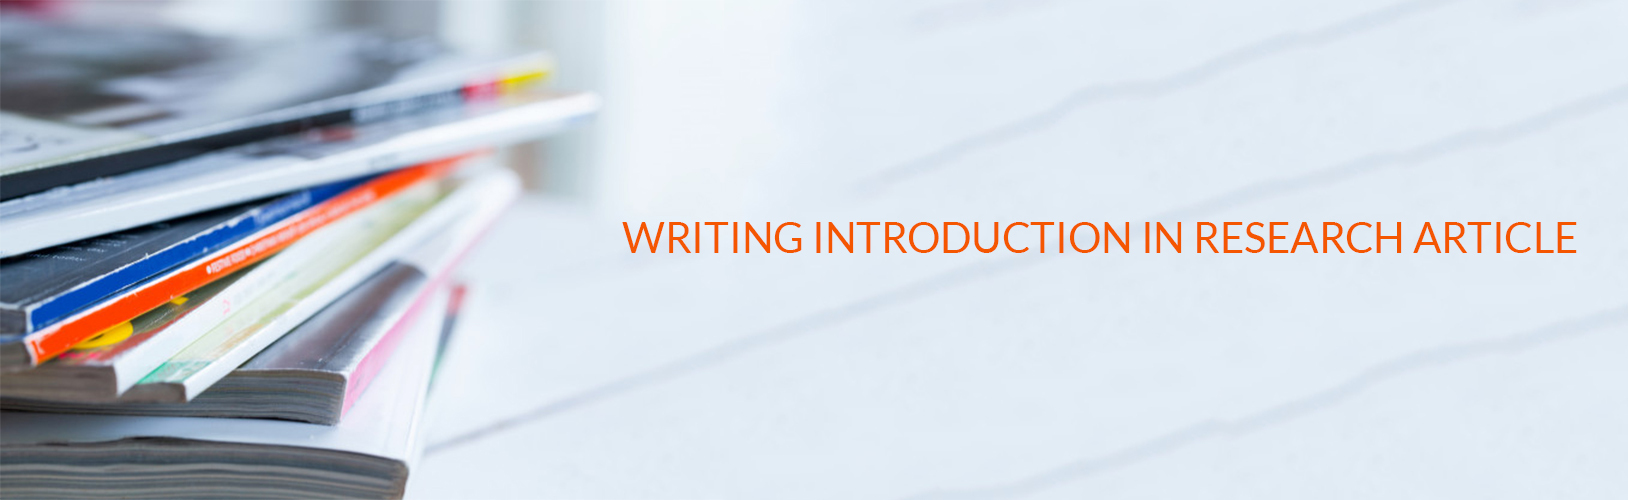 WRITING INTRODUCTION IN A RESEARCH ARTICLE